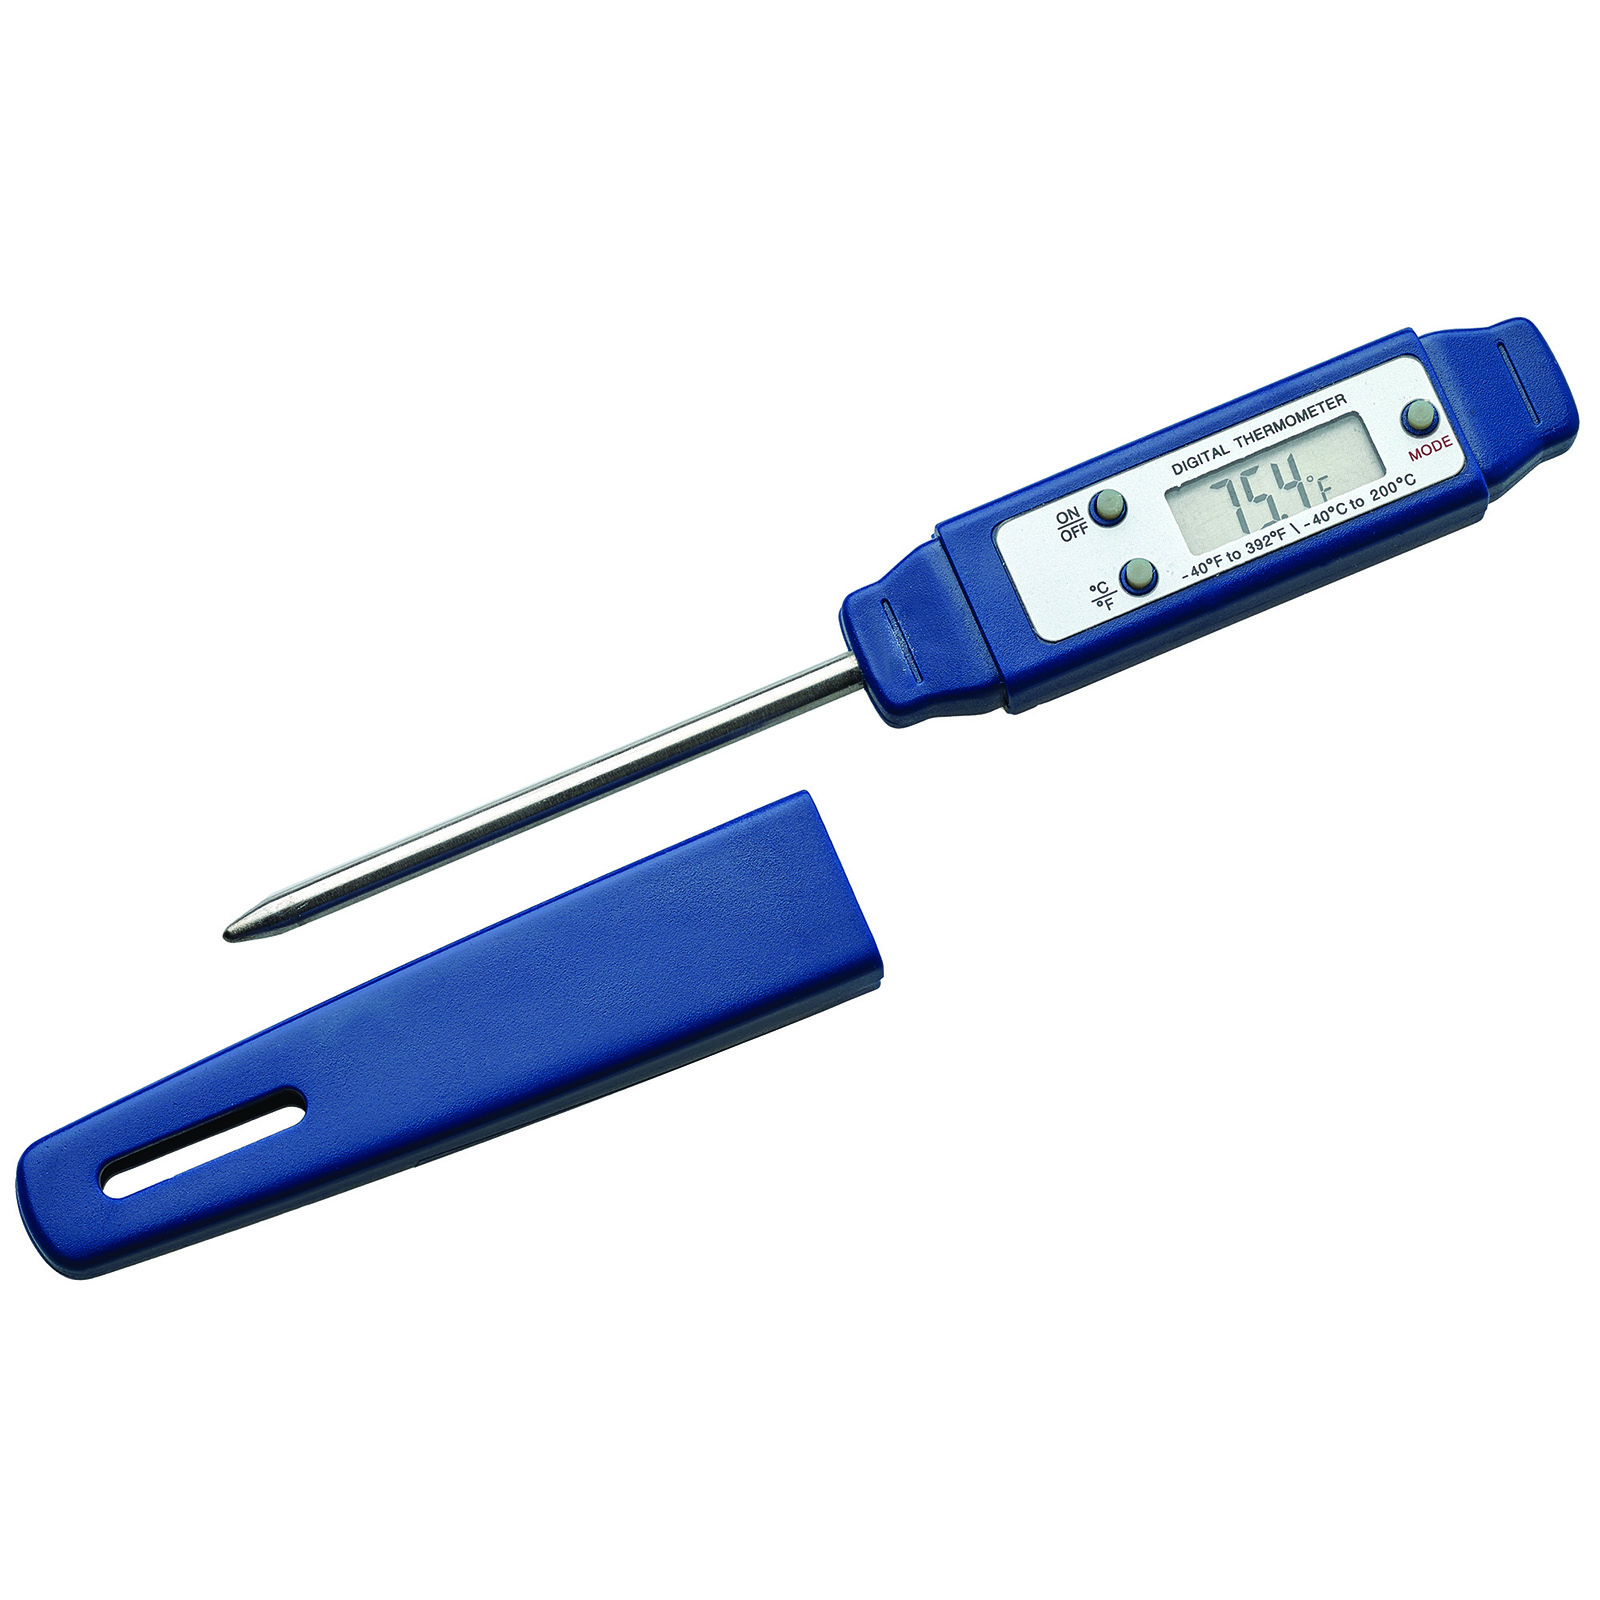 Pen-style, digital type,
instant read, Thermometer,
temperature range -58 to
392F (-50 to 200C), 2-3/4&quot;
probe, 7/8&quot; LCD display with
hold feature, min &amp; max
feature, auto shut-off,
waterproof, protective sheath, 
each 